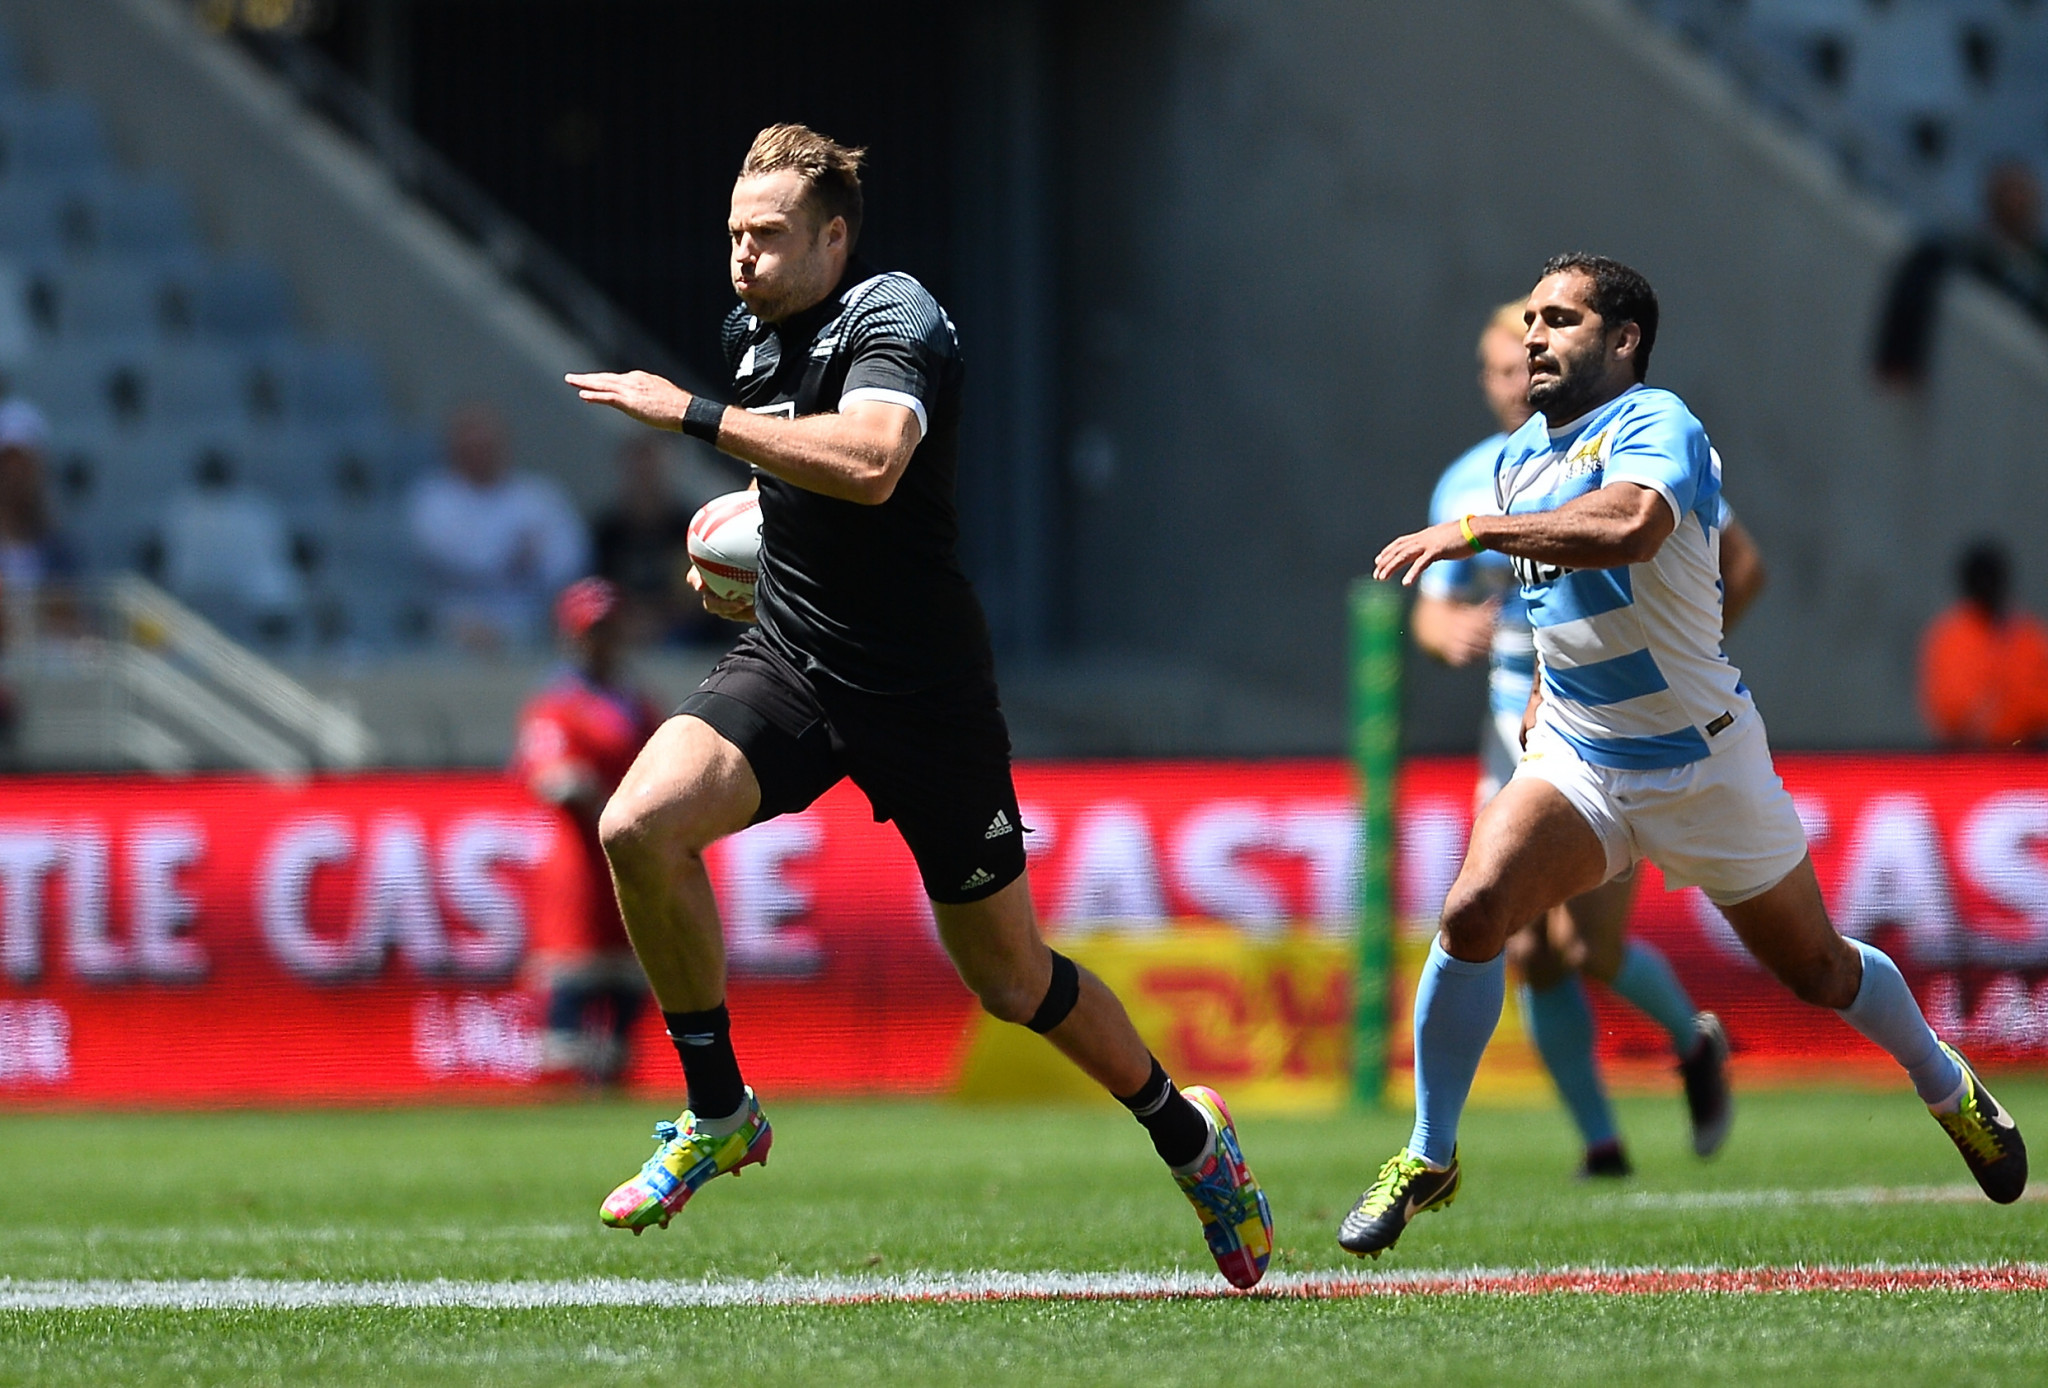 New Zealand eye three in a row at Sydney World Rugby Sevens Series